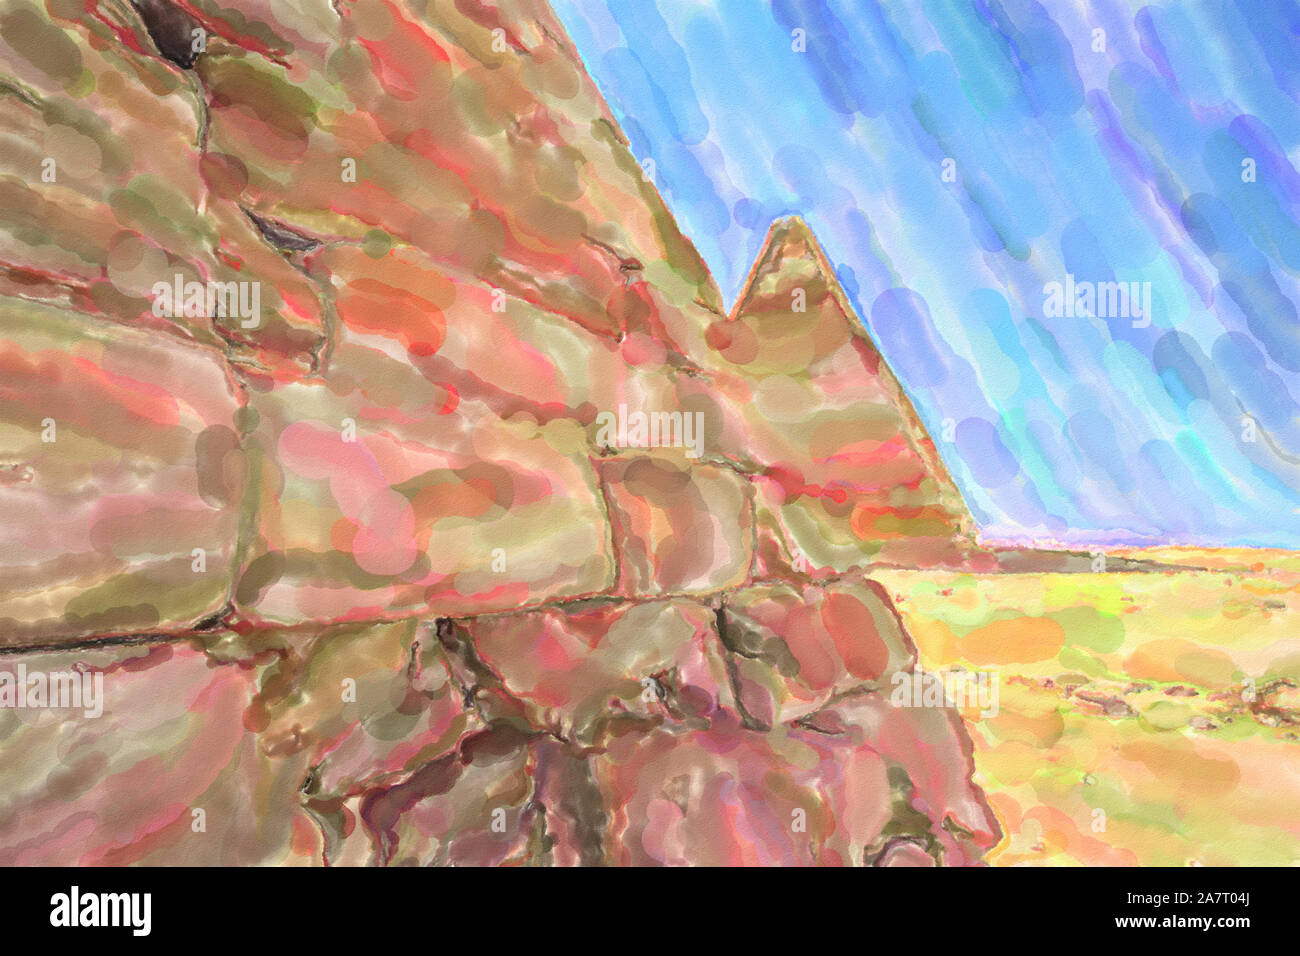 watercolor illustration: Close-up view of a pyramid of the black pharaohs in Sudan with a view of a farther pyramid in the distance, Africa Stock Photo